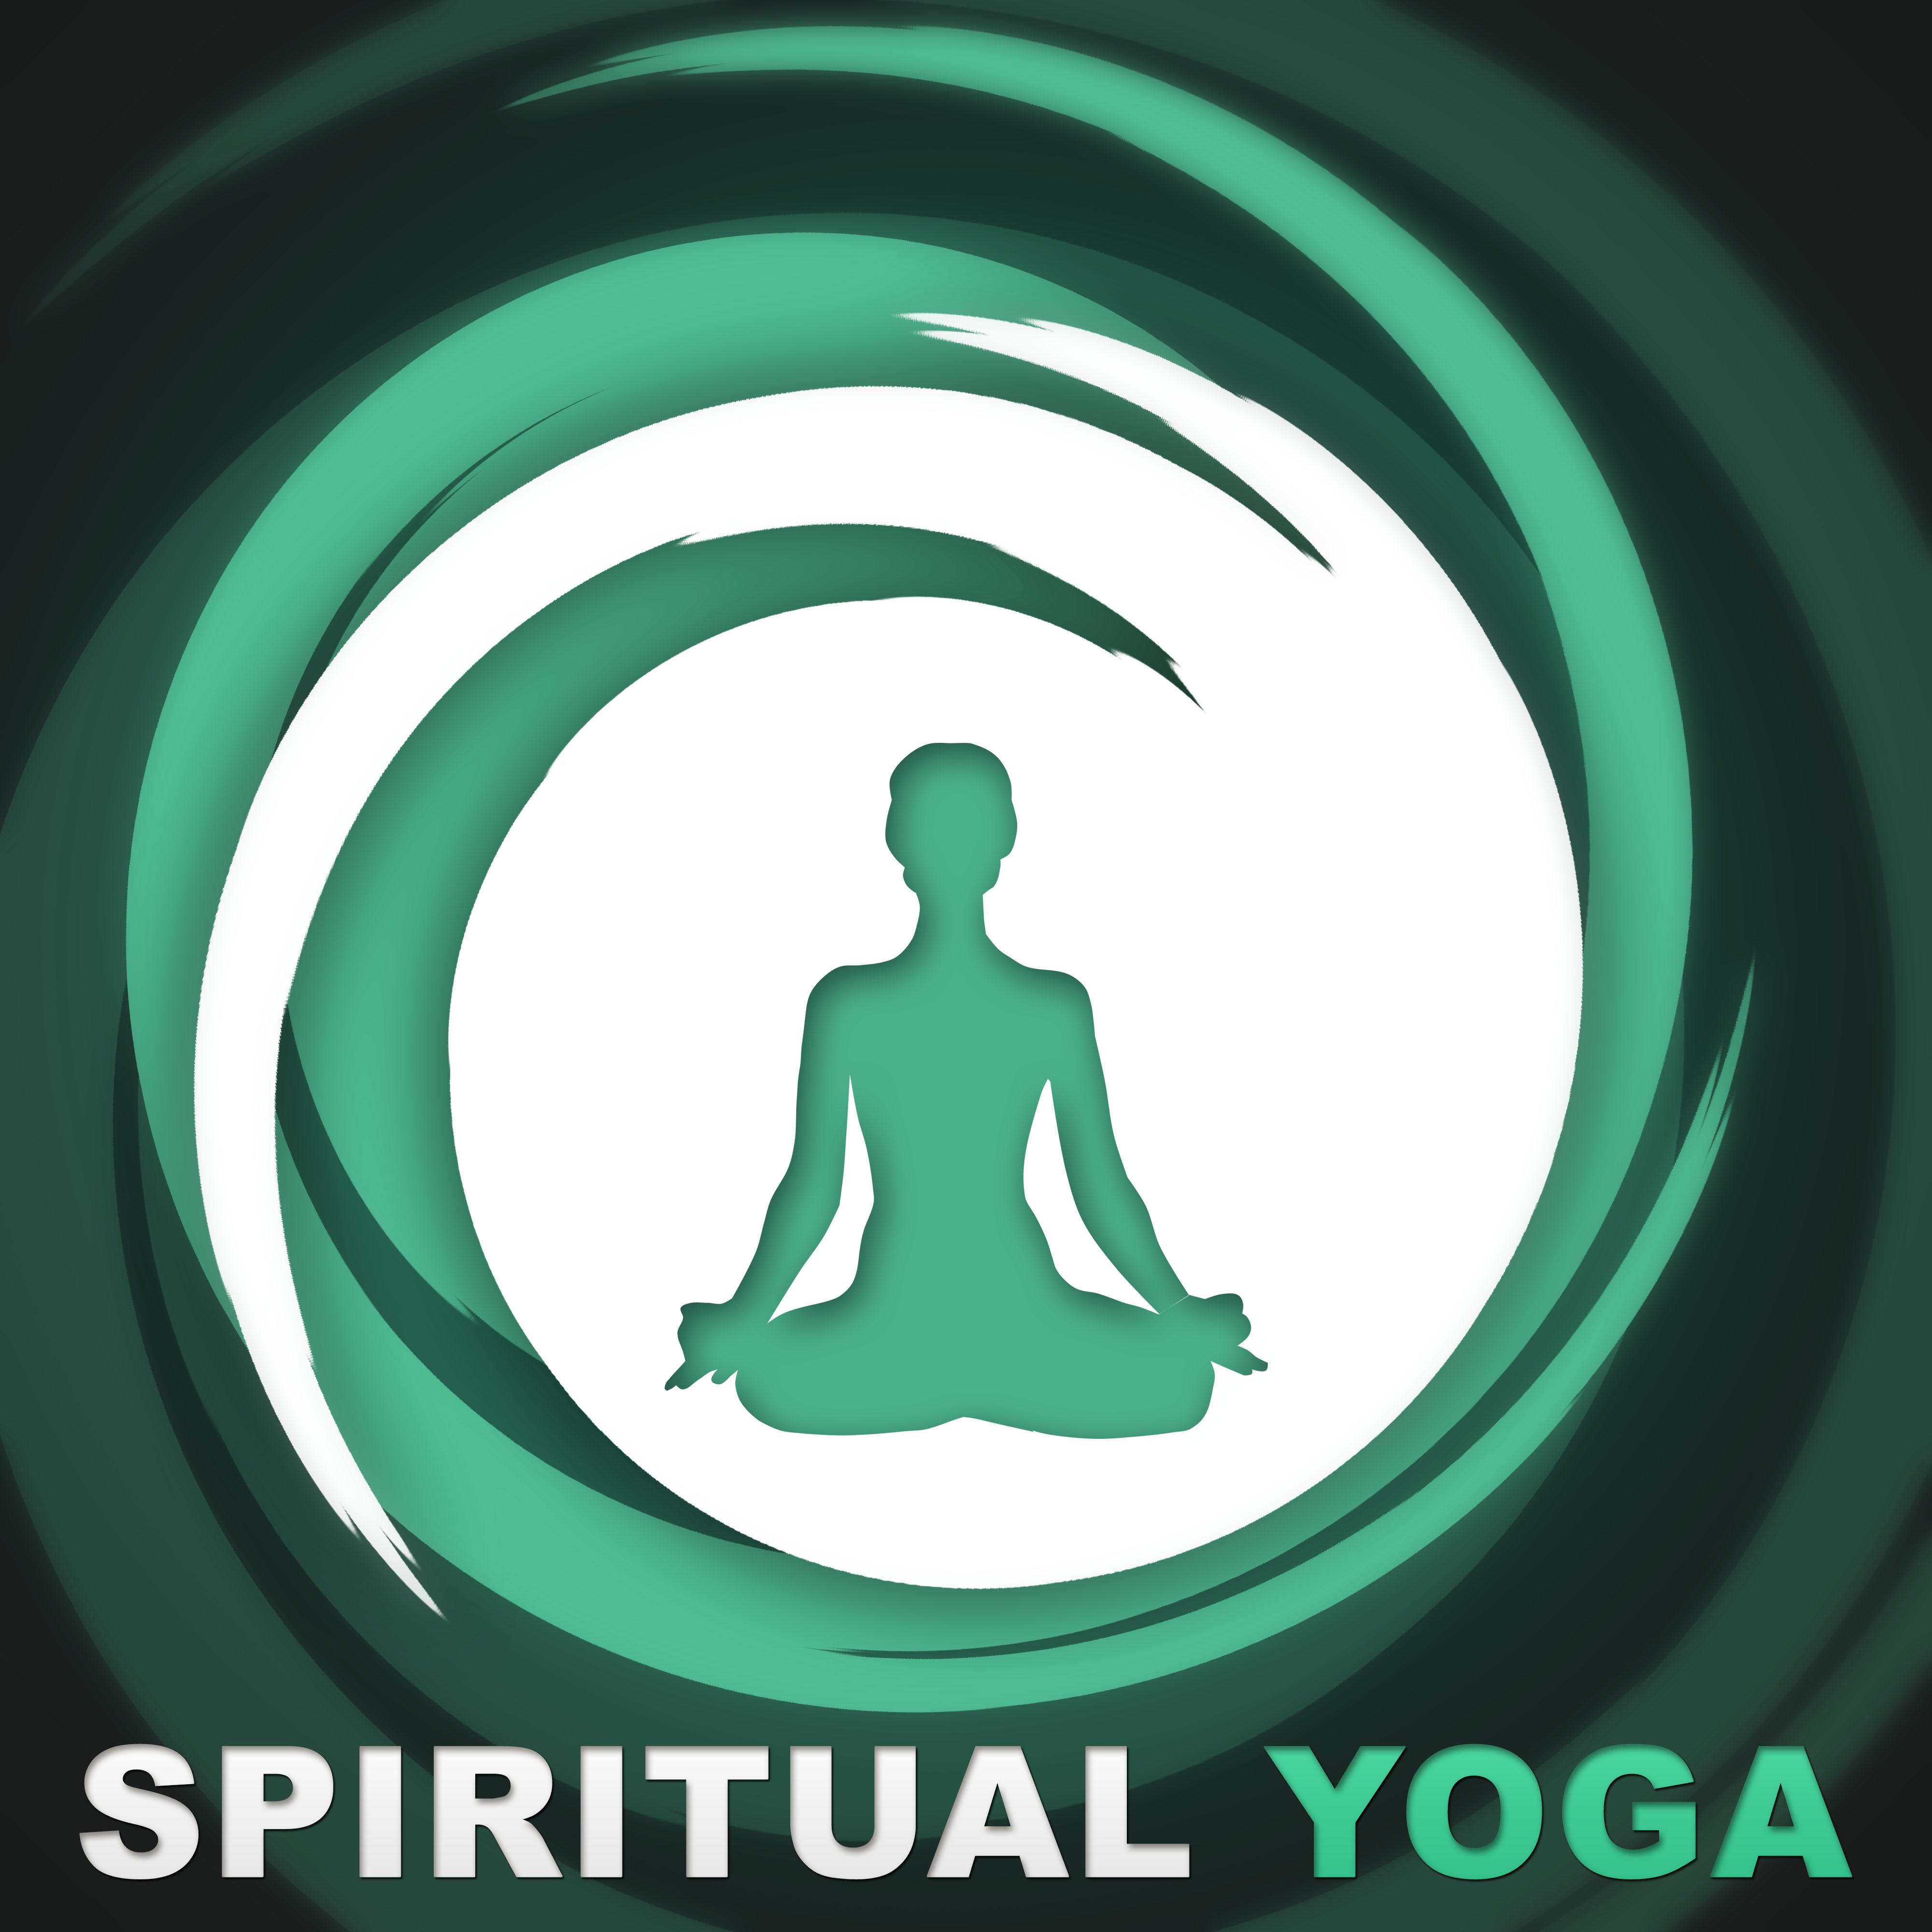 Spirytual Yoga – Healing Nature Sounds for Yoga, Mindfulness Meditations, Total Relaxation, Calm Down, Sound Therapy